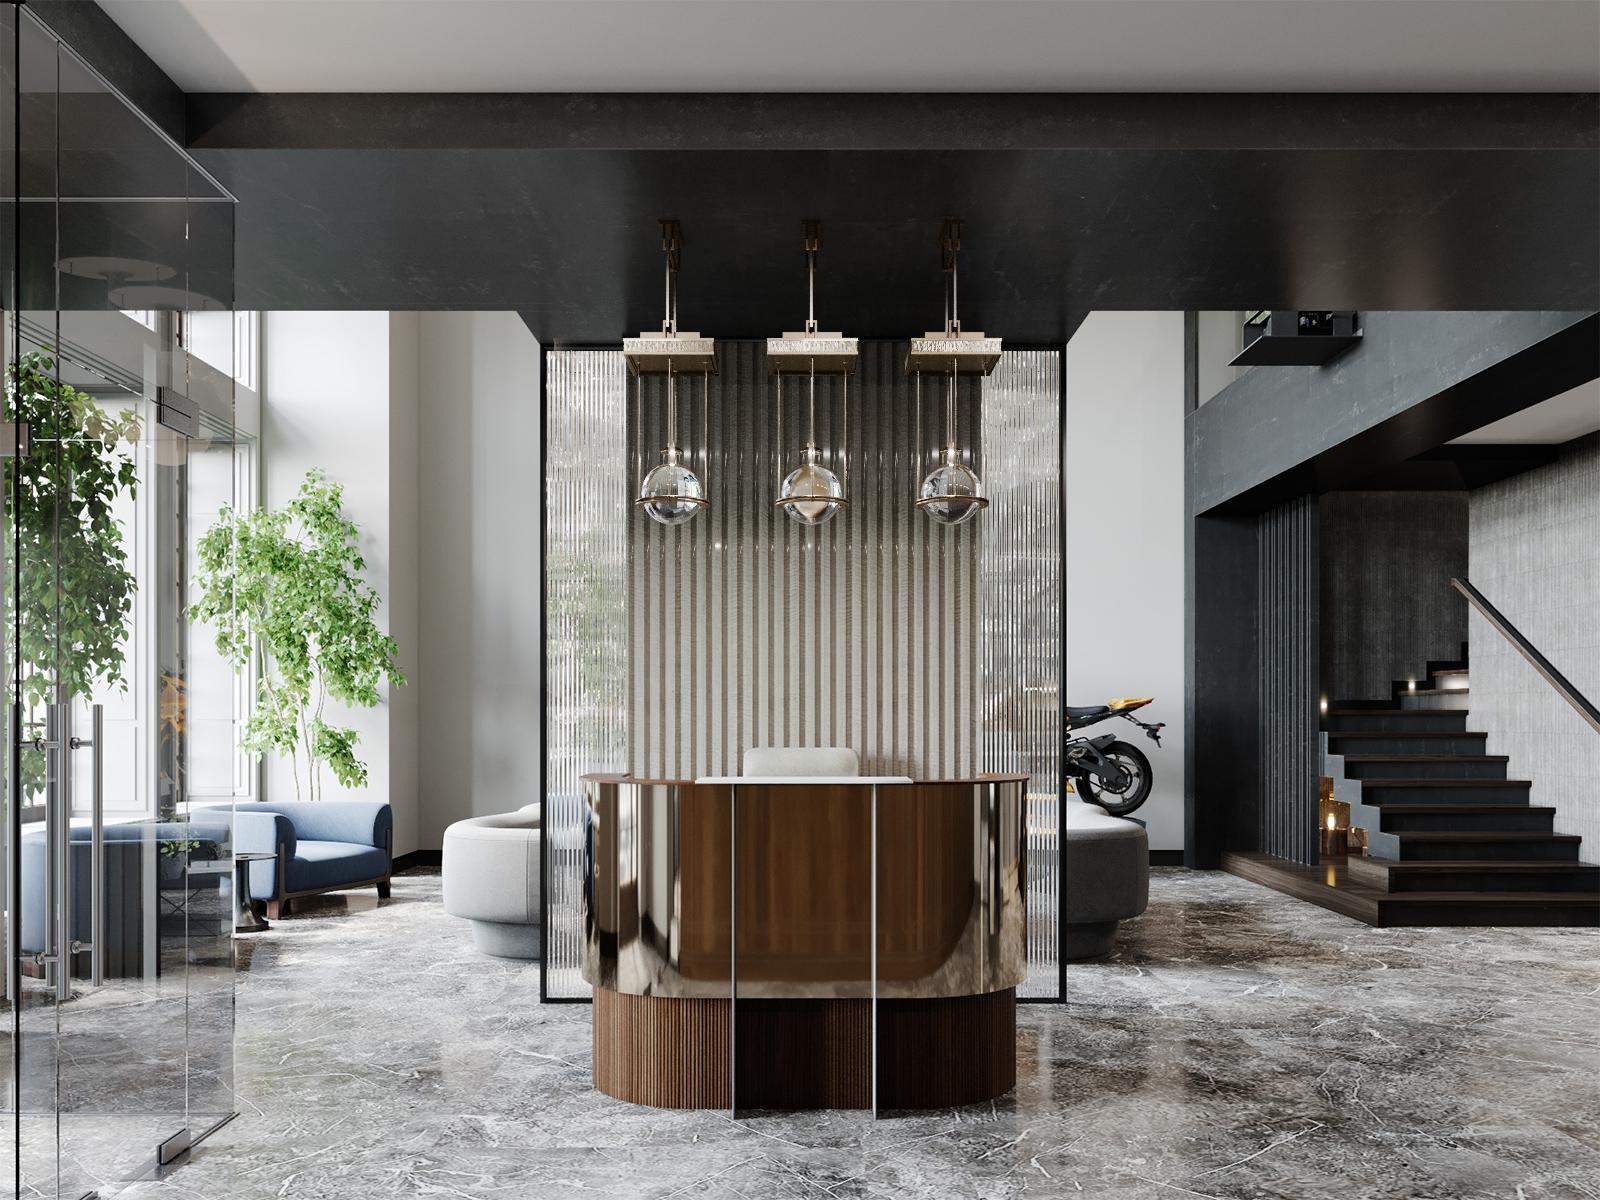 A statement piece suitable for both minimalist and classical interiors, the AVIOR contemporary chandelier almost appears weightless due to its finely judged proportions and meticulously engineered construction. The internal light sources are